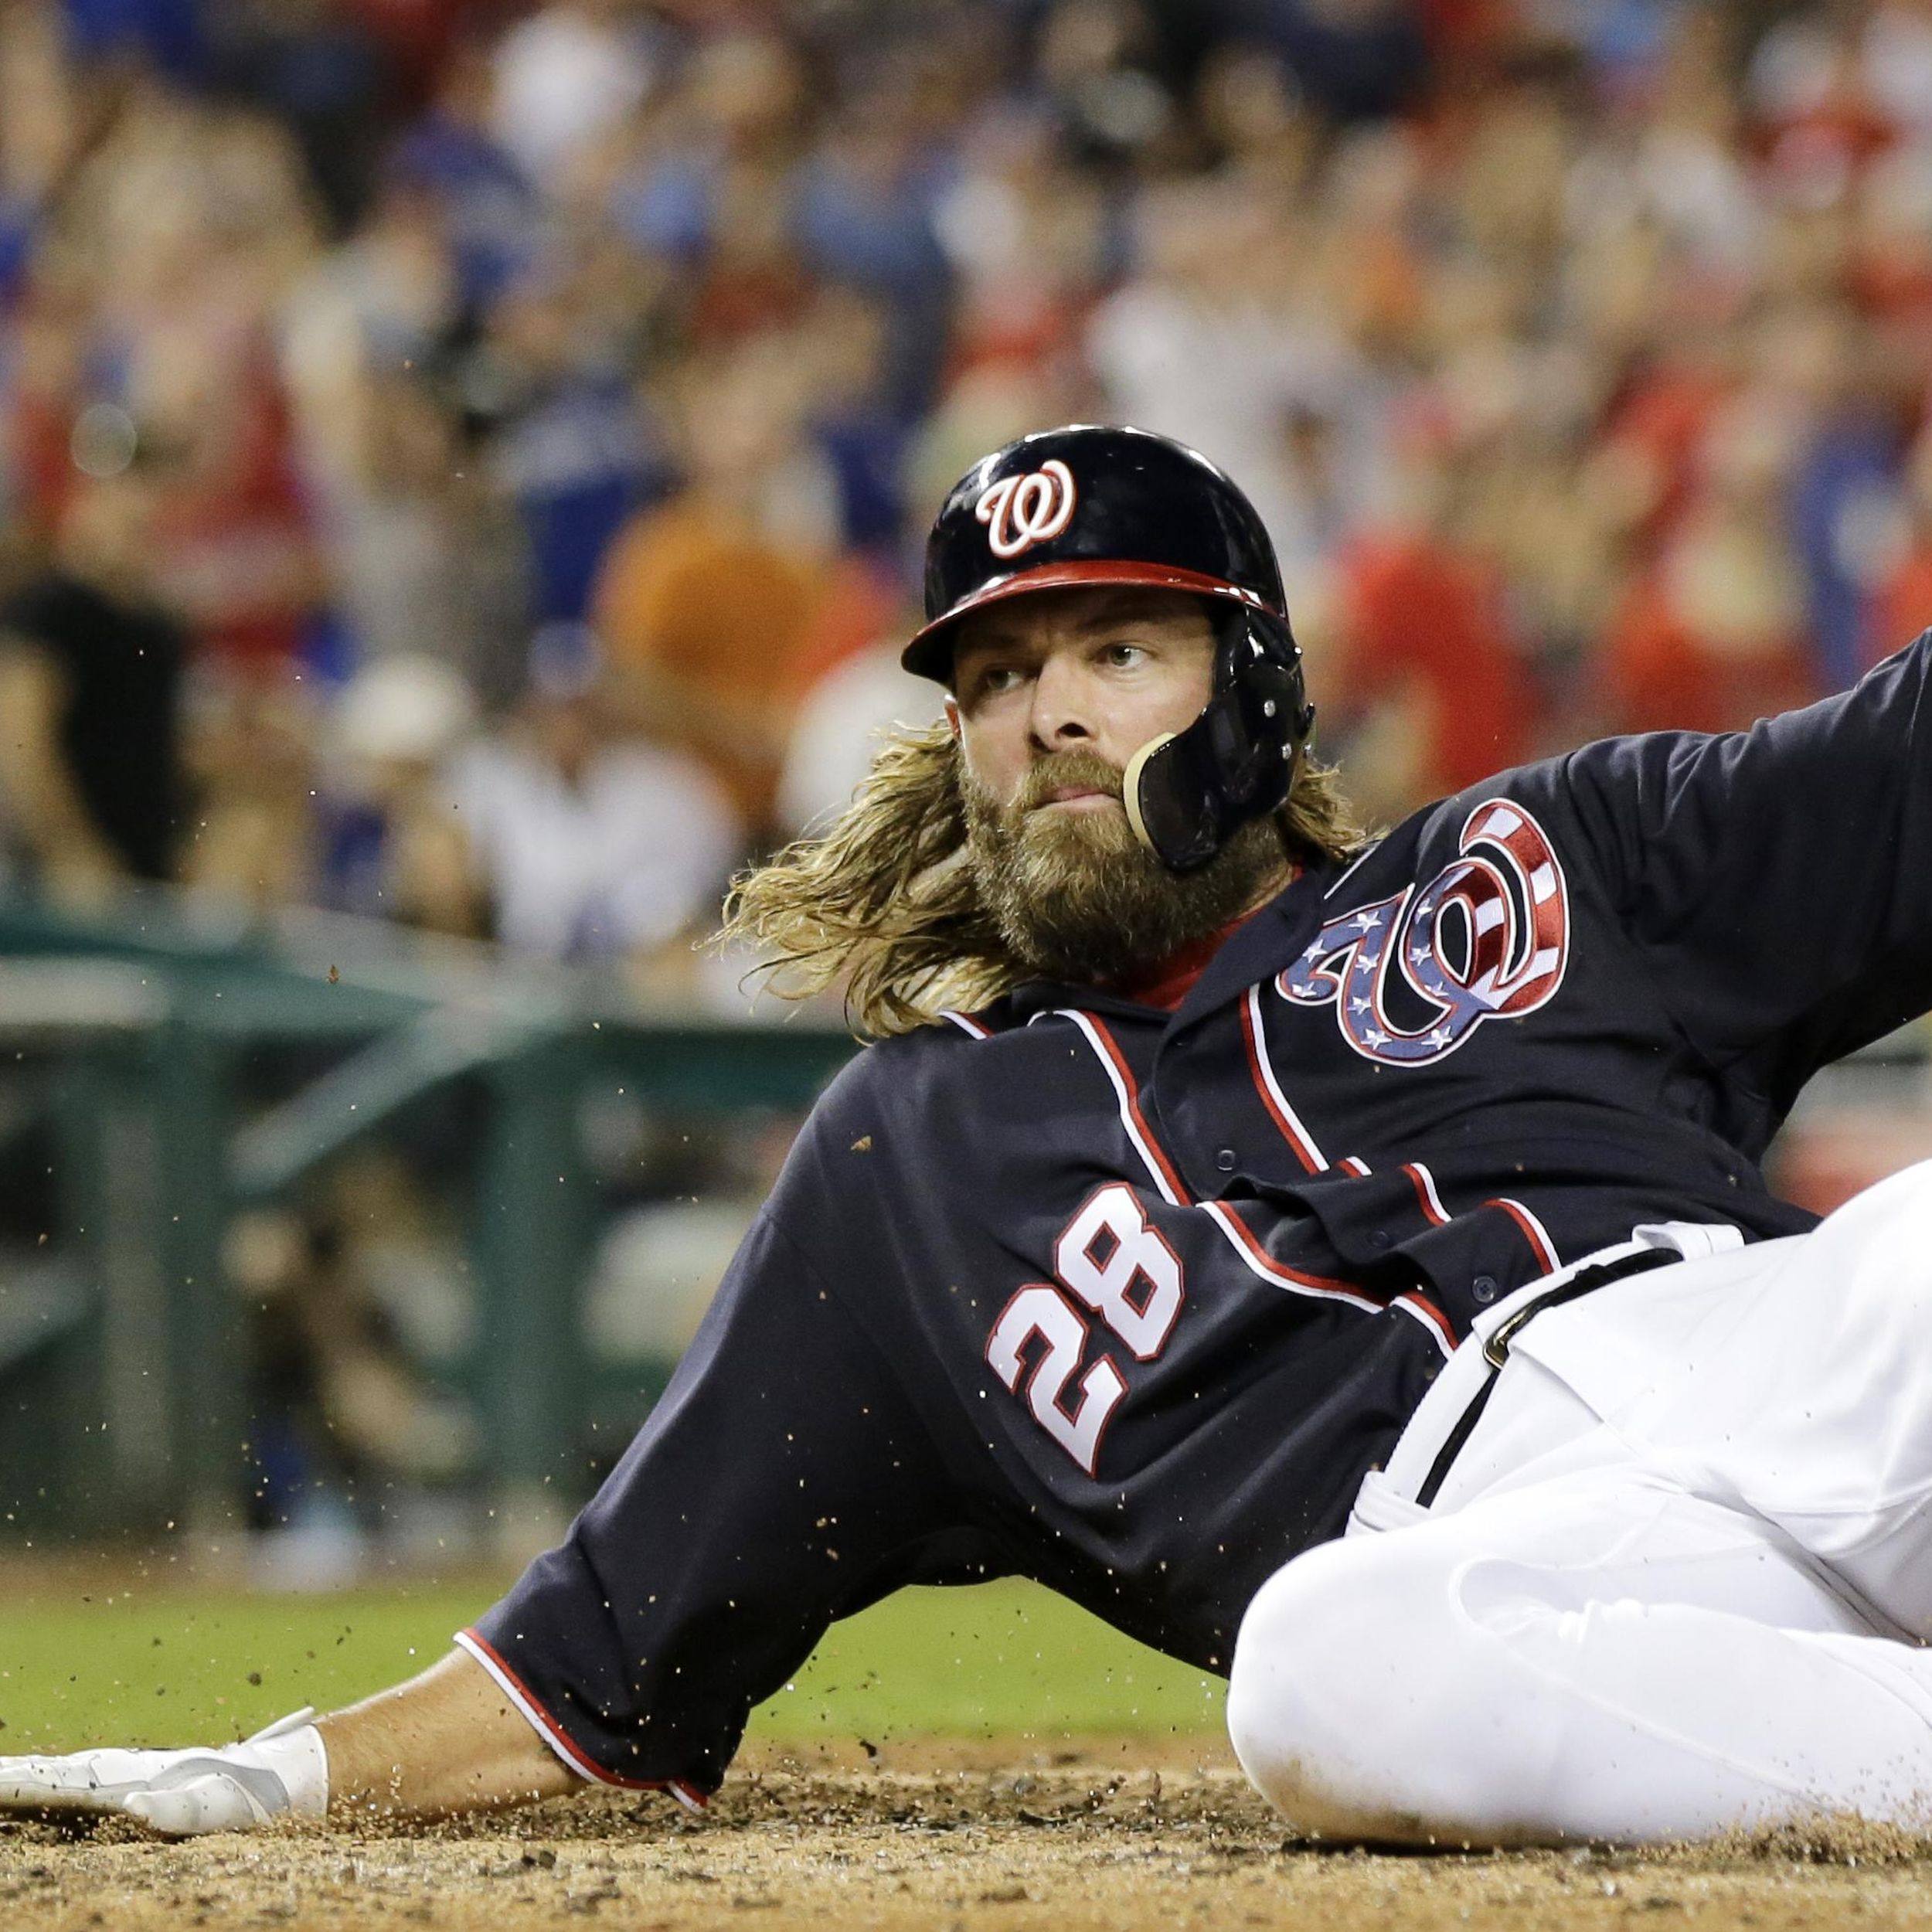 Jayson Werth, Mariners Reportedly Agree to Minor League Contract